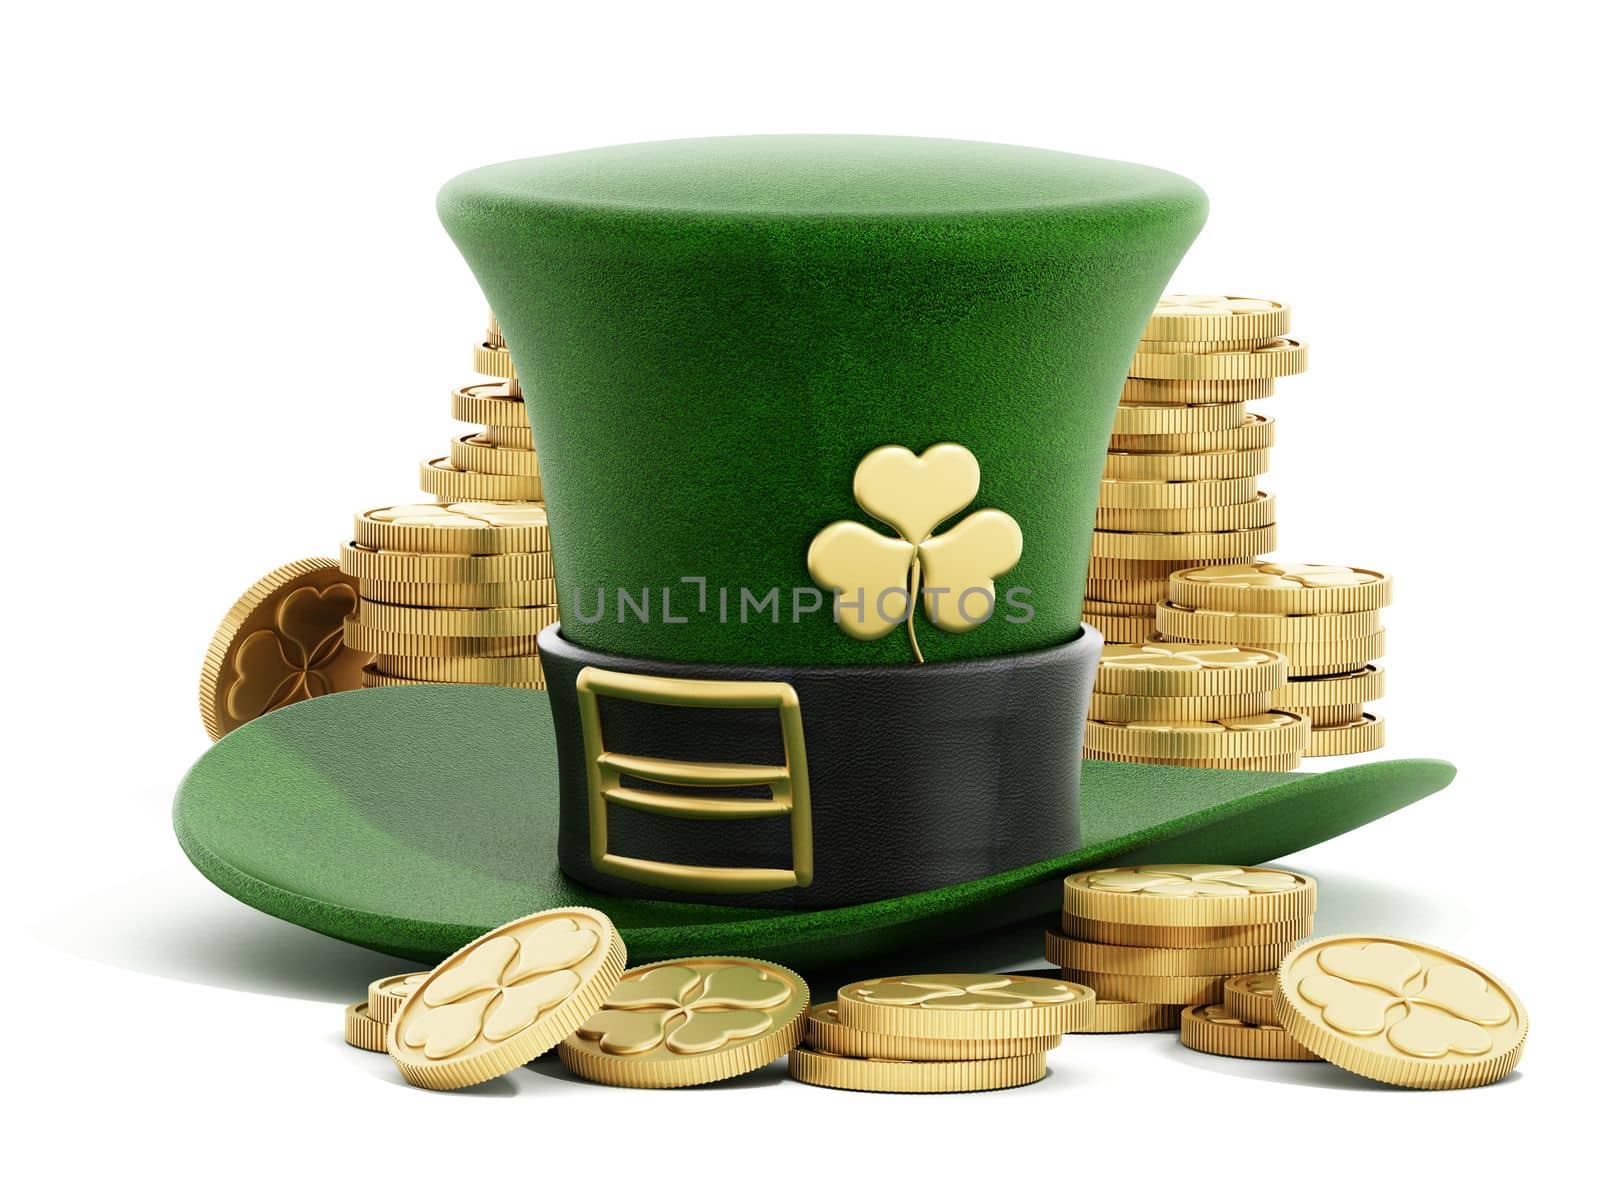 Leprechaun's green hat and gold coins isolated on white background. 3D illustration.